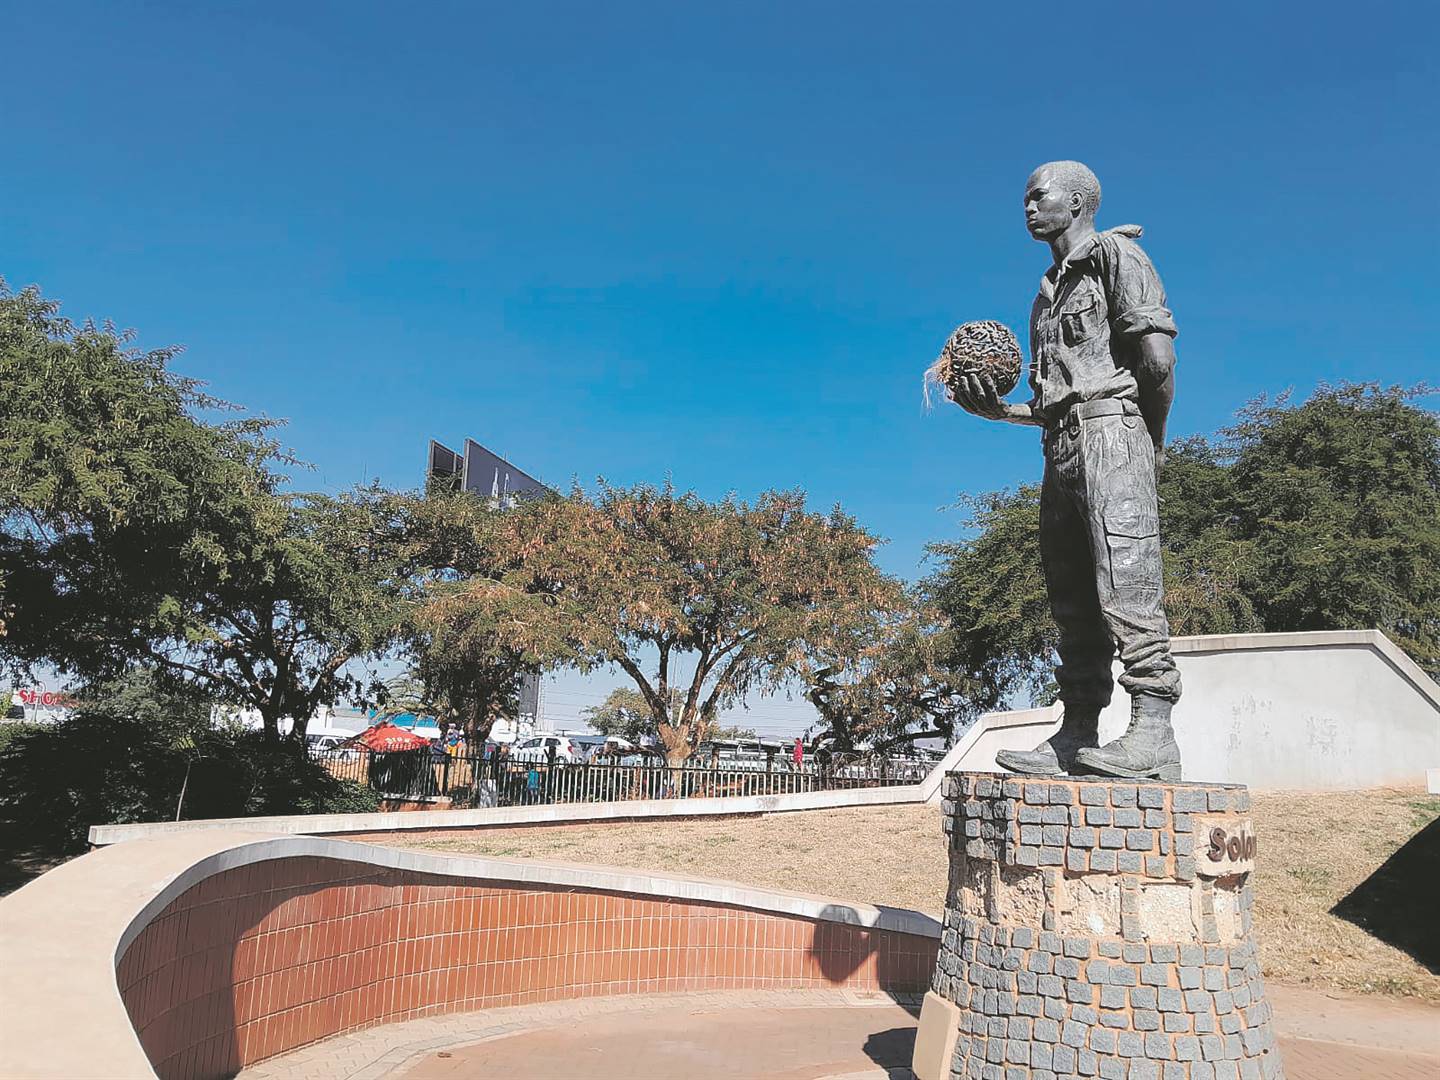 The imposing bronze statue of uMkhonto weSizwe combatant Solomon Kalushi Mahlangu, who was executed by the apartheid regime. Holding a sphere in his hand, which symbolises a world of opportunities, Mahlangu stands tall on a large pedestal in the Solomon Mahlangu Freedom Square precinct in Mamelodi West in Pretoria